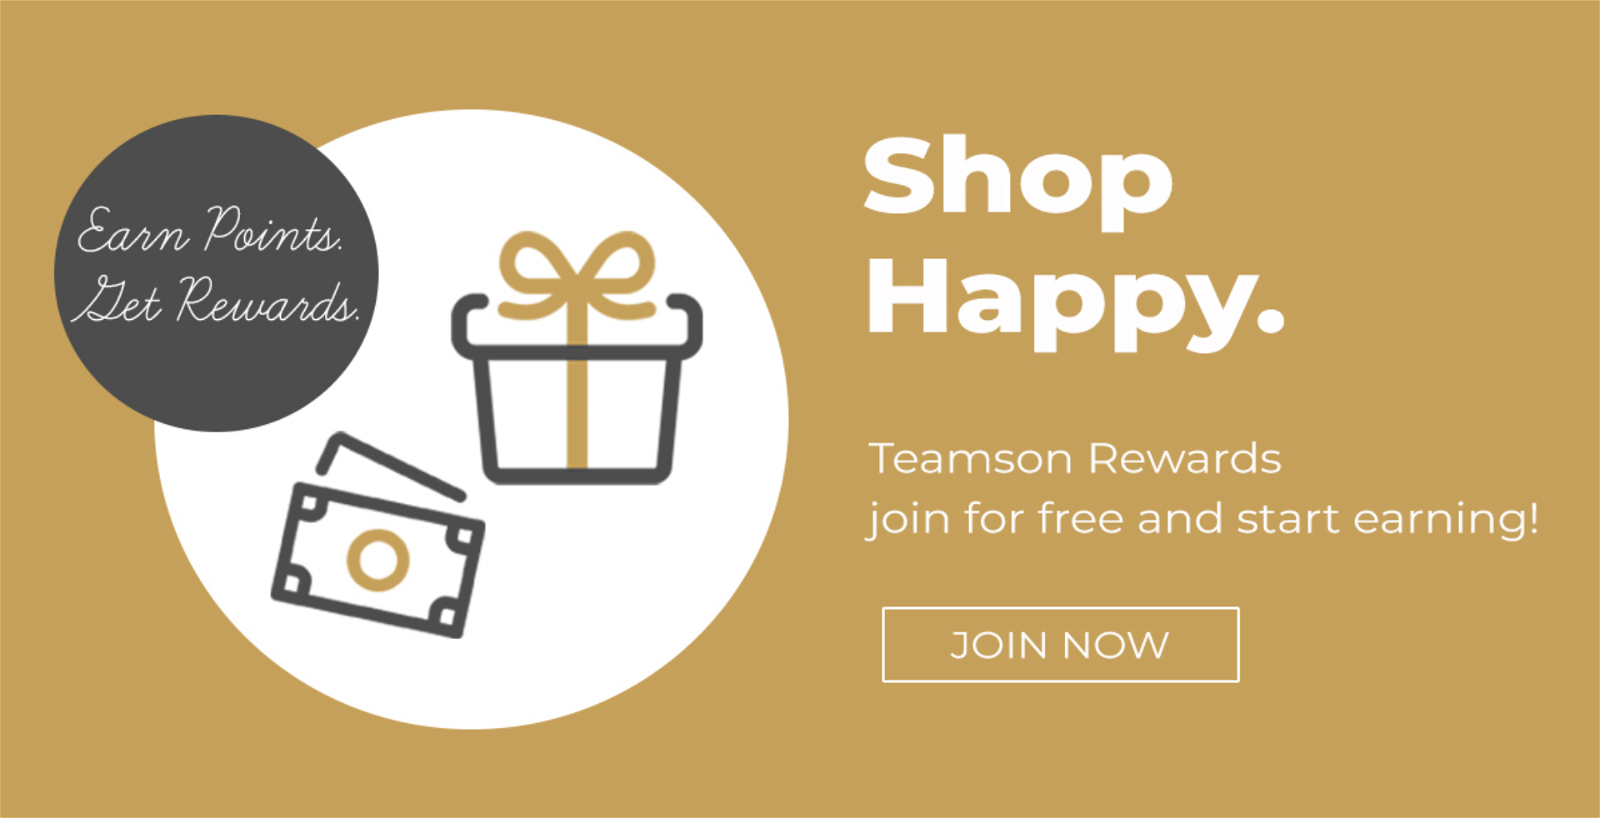 Shop Happy. Teamson rewards join for free and start earning!